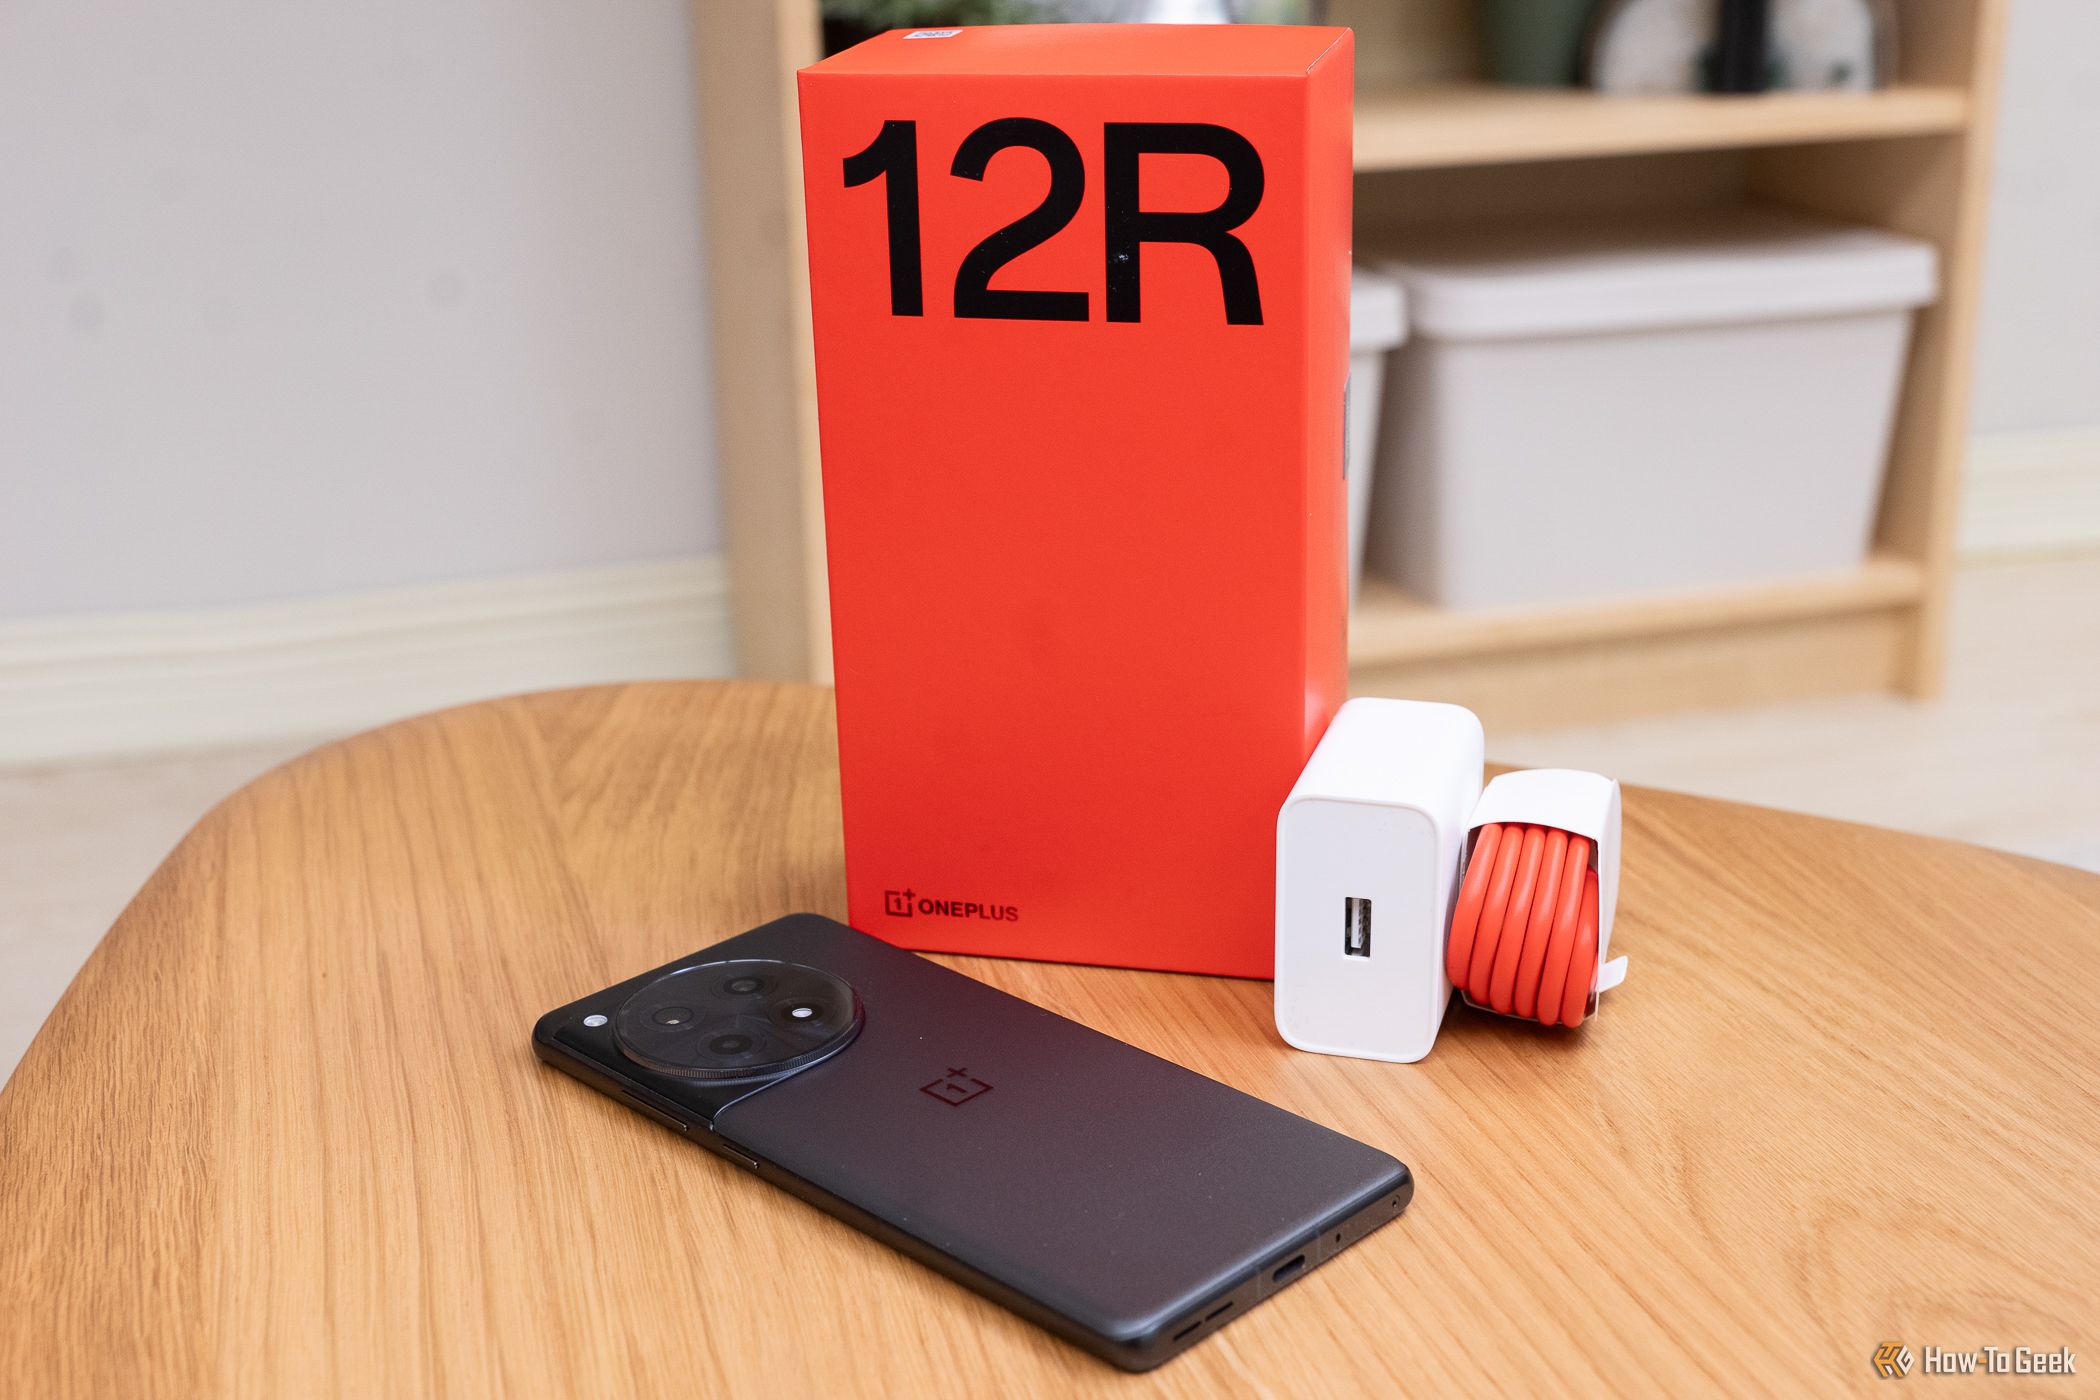 Box with included accessories for the OnePlus12R